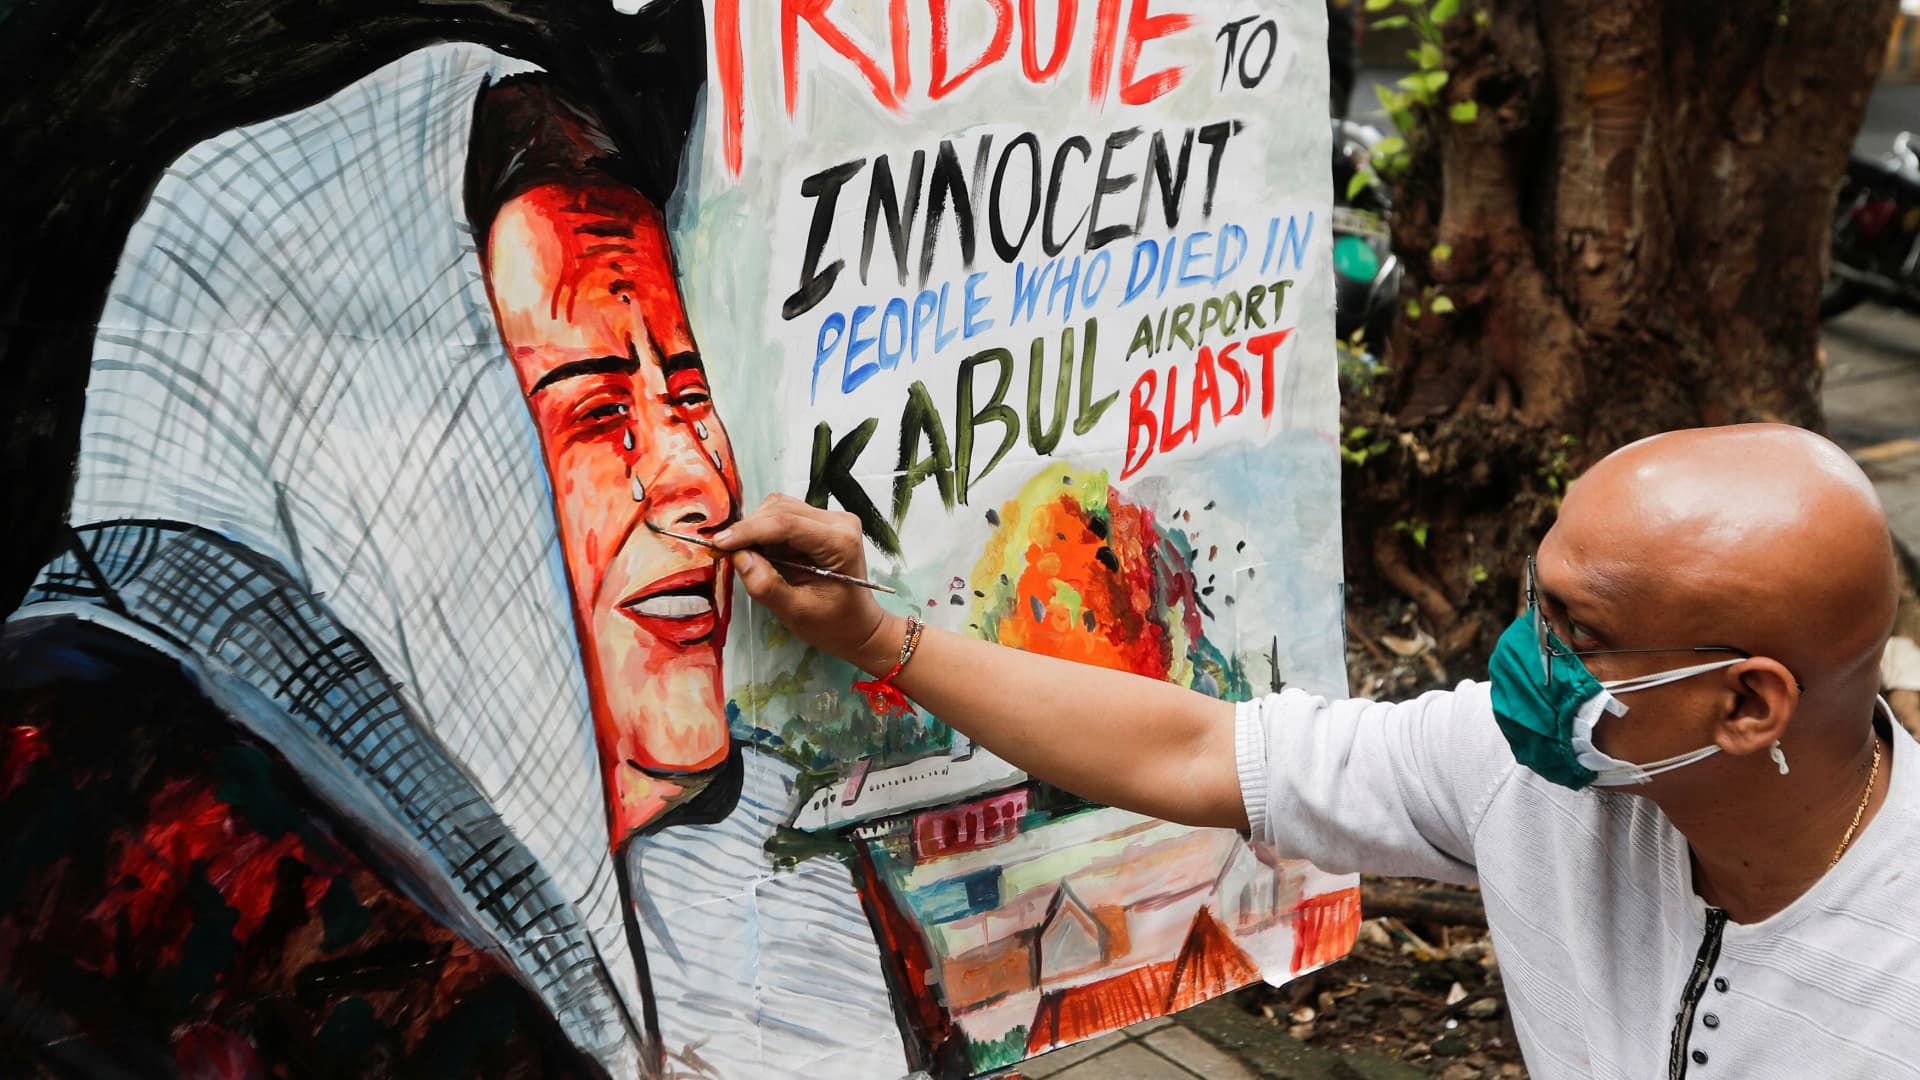 An artist paints a tribute to victims of the bomb blasts at the Hamid Kazrai International airport in Kabul, outside an art school in Mumbai, India, August 27, 2021.